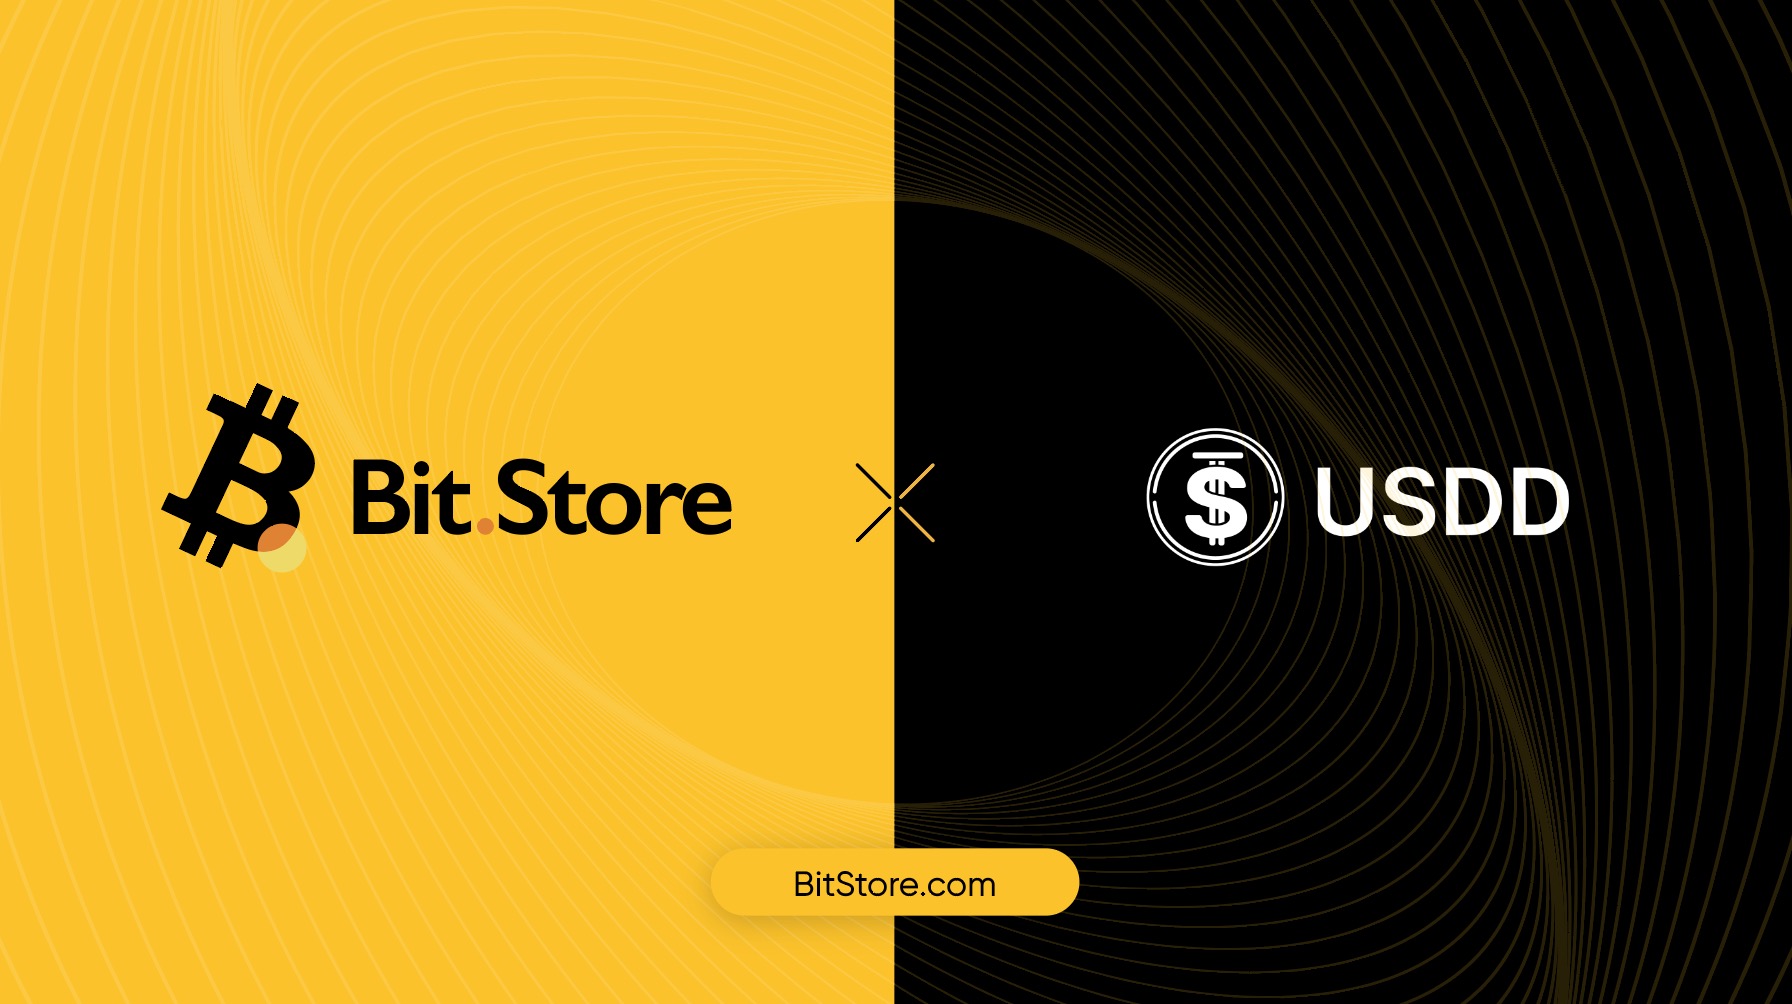 , BitStore.com Announces Integration of USDD Stablecoin for Global Transactions